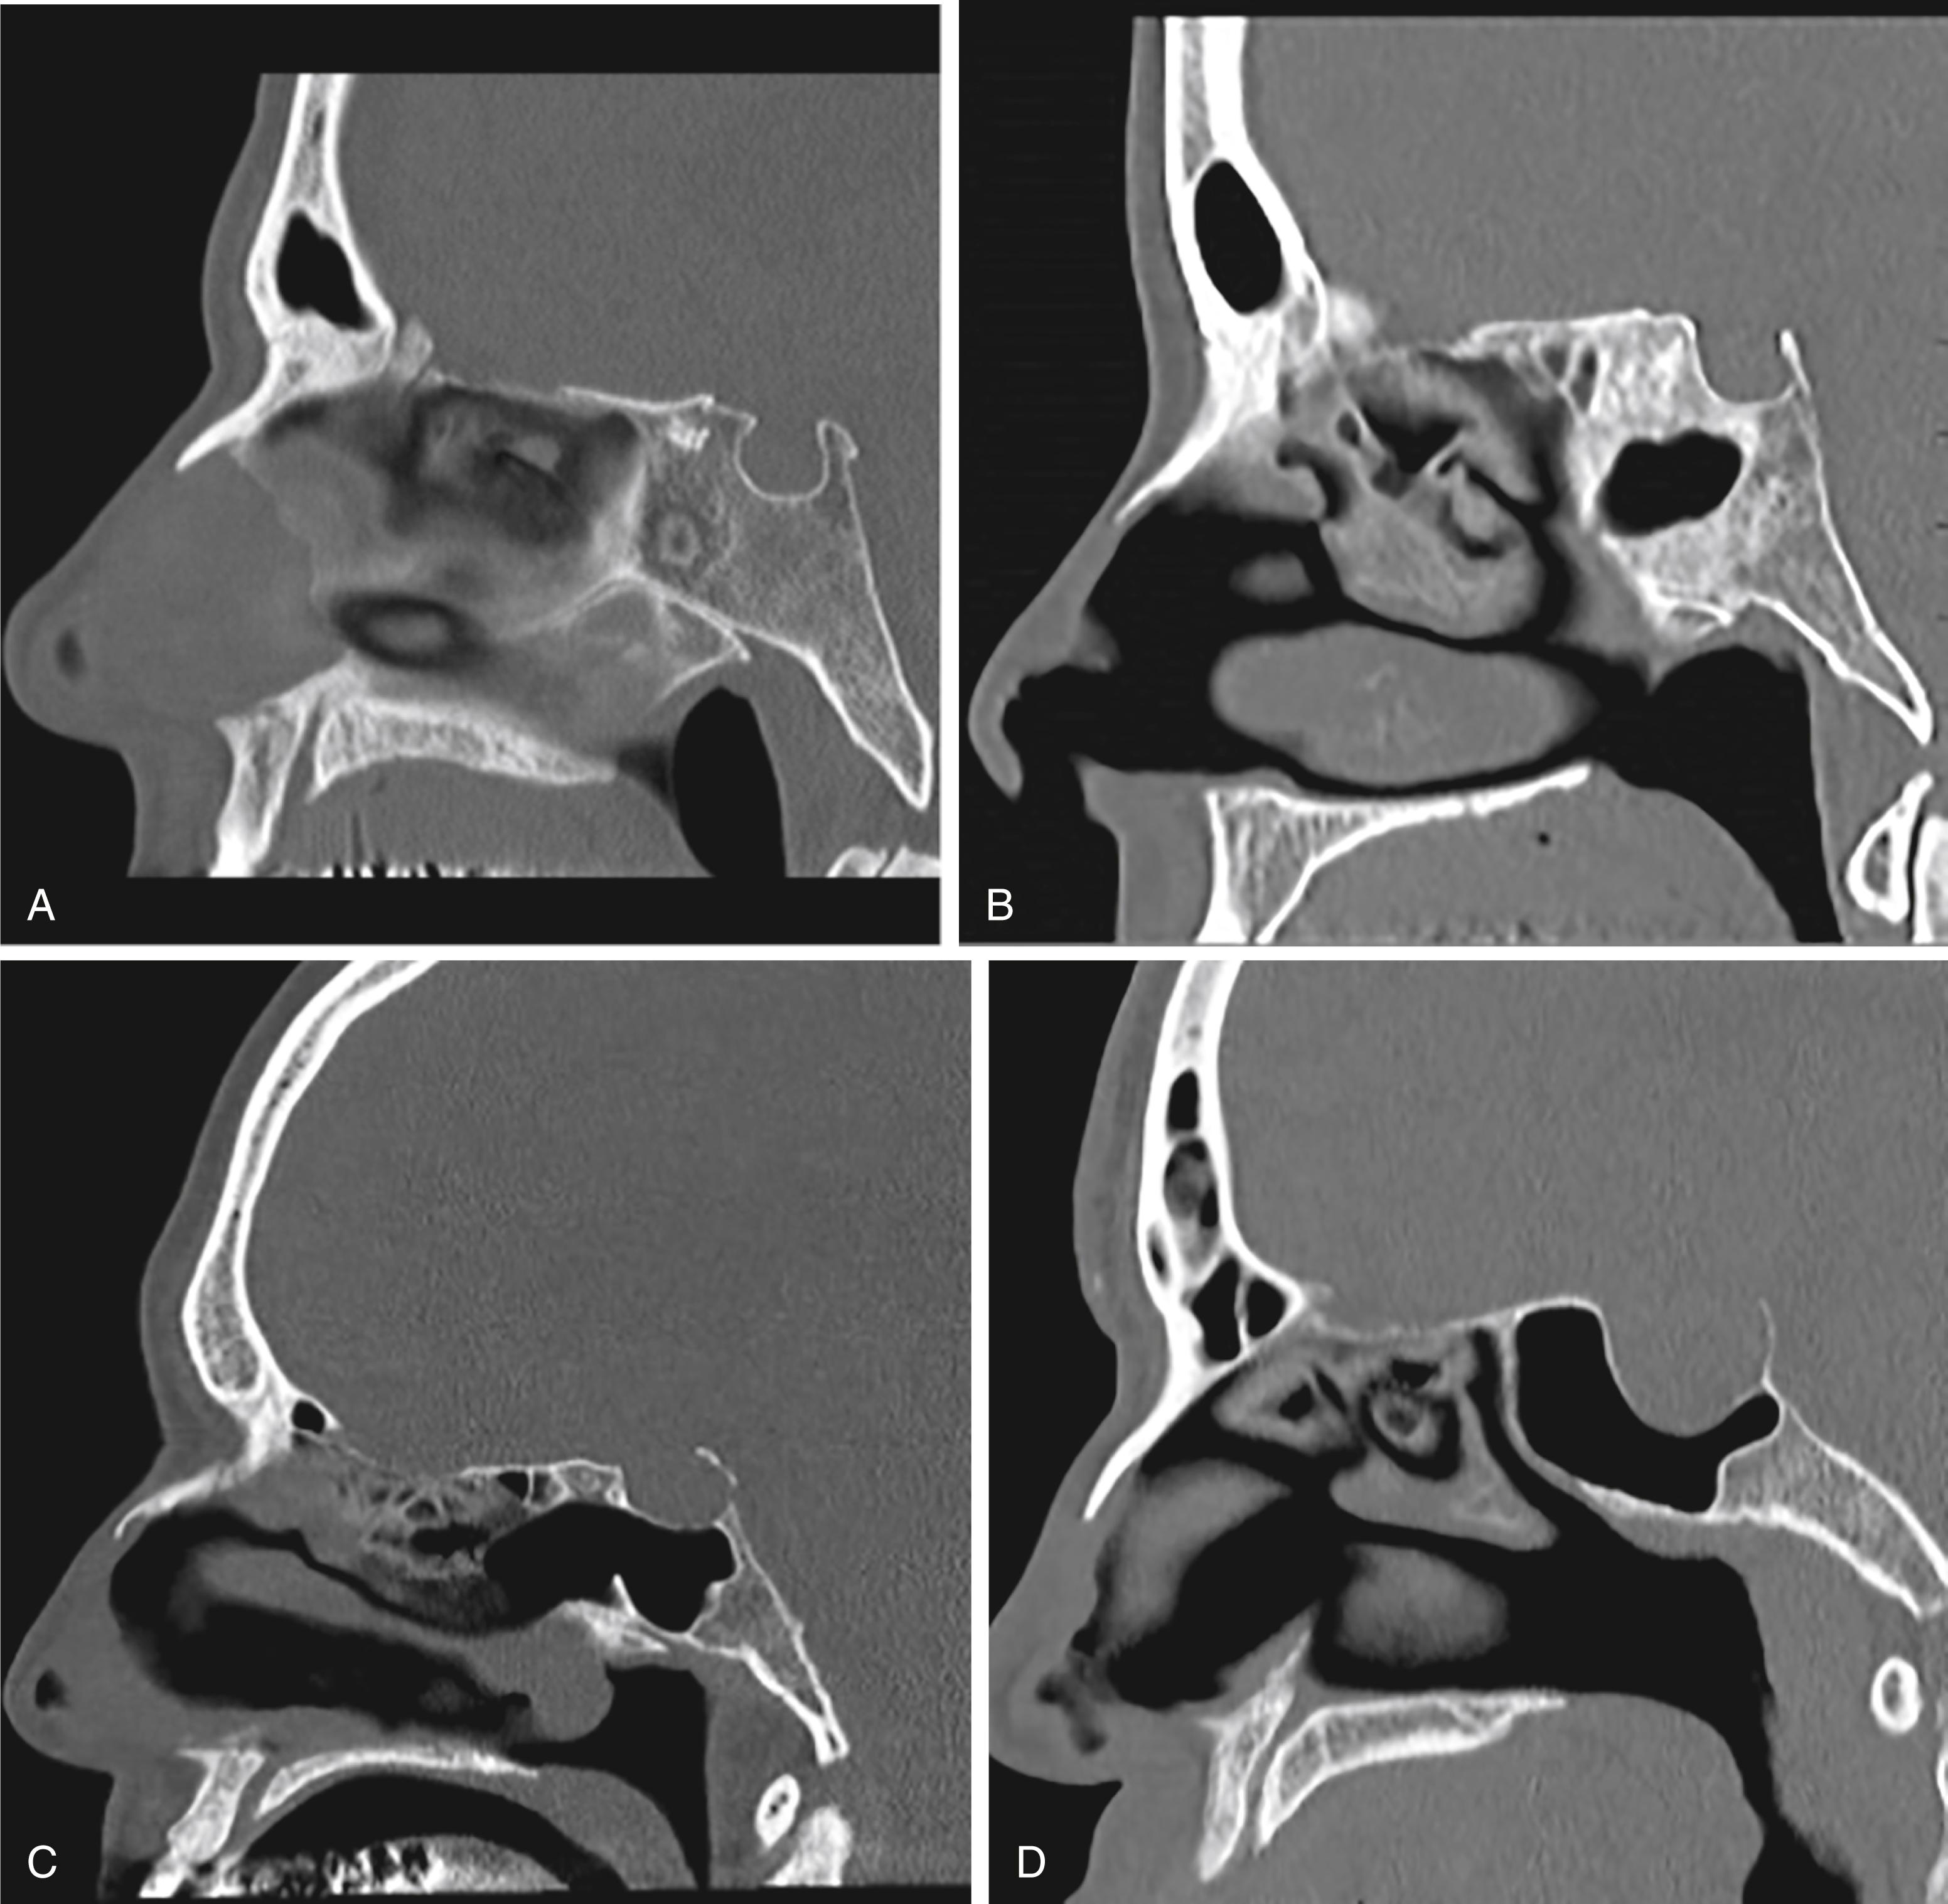 FIGURE 12.5, Classification of sphenoid pneumatization. (A) Concha classification has little to no pneumatization. (B) Presellar classification refers to pneumatization up to the anterior margin of the sella, without a defined clival region. (C) Sellar pneumatization extends anterior and posterior to the sella turcica. (D) Postsellar classification describes pneumatization similar to sellar pneumatization with the addition of pneumatized space in the dorsum sellae.